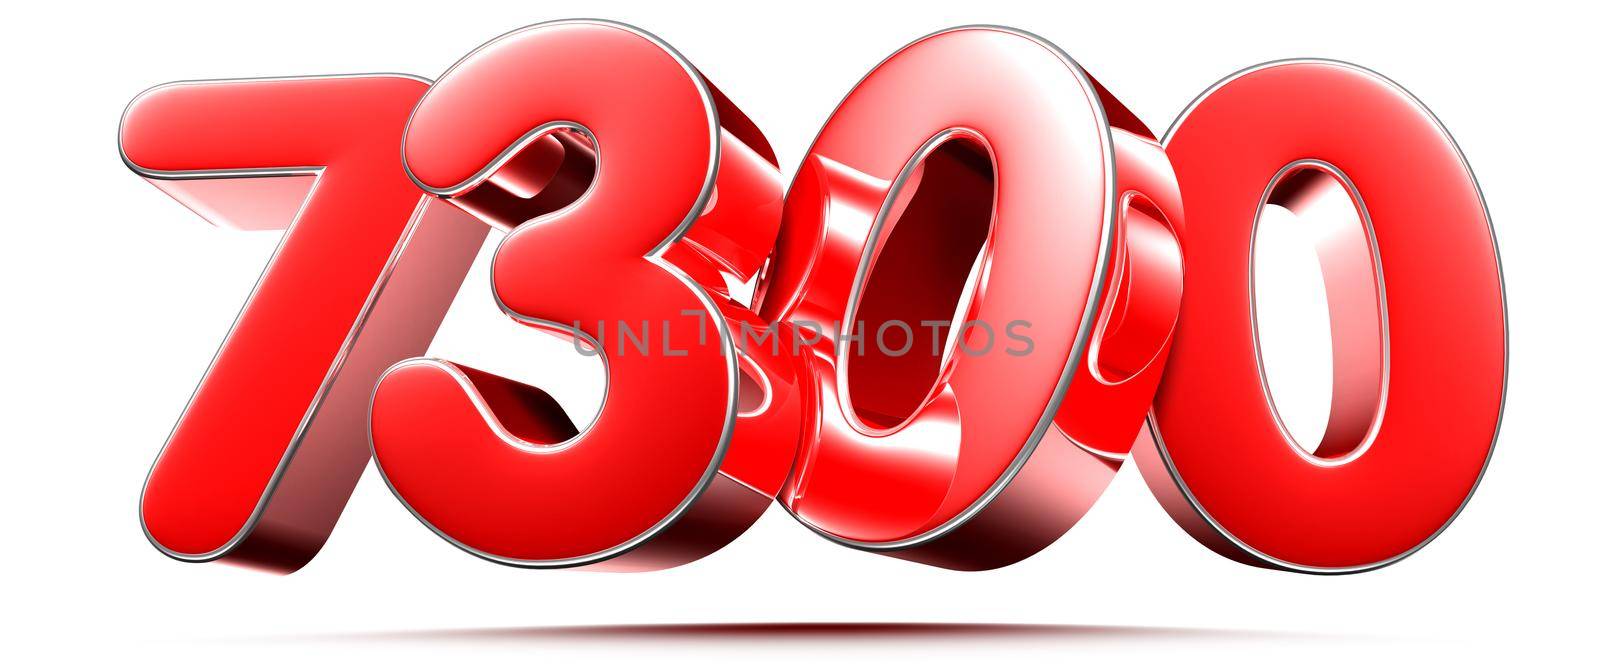 Rounded red numbers 7300 on white background 3D illustration with clipping path by thitimontoyai